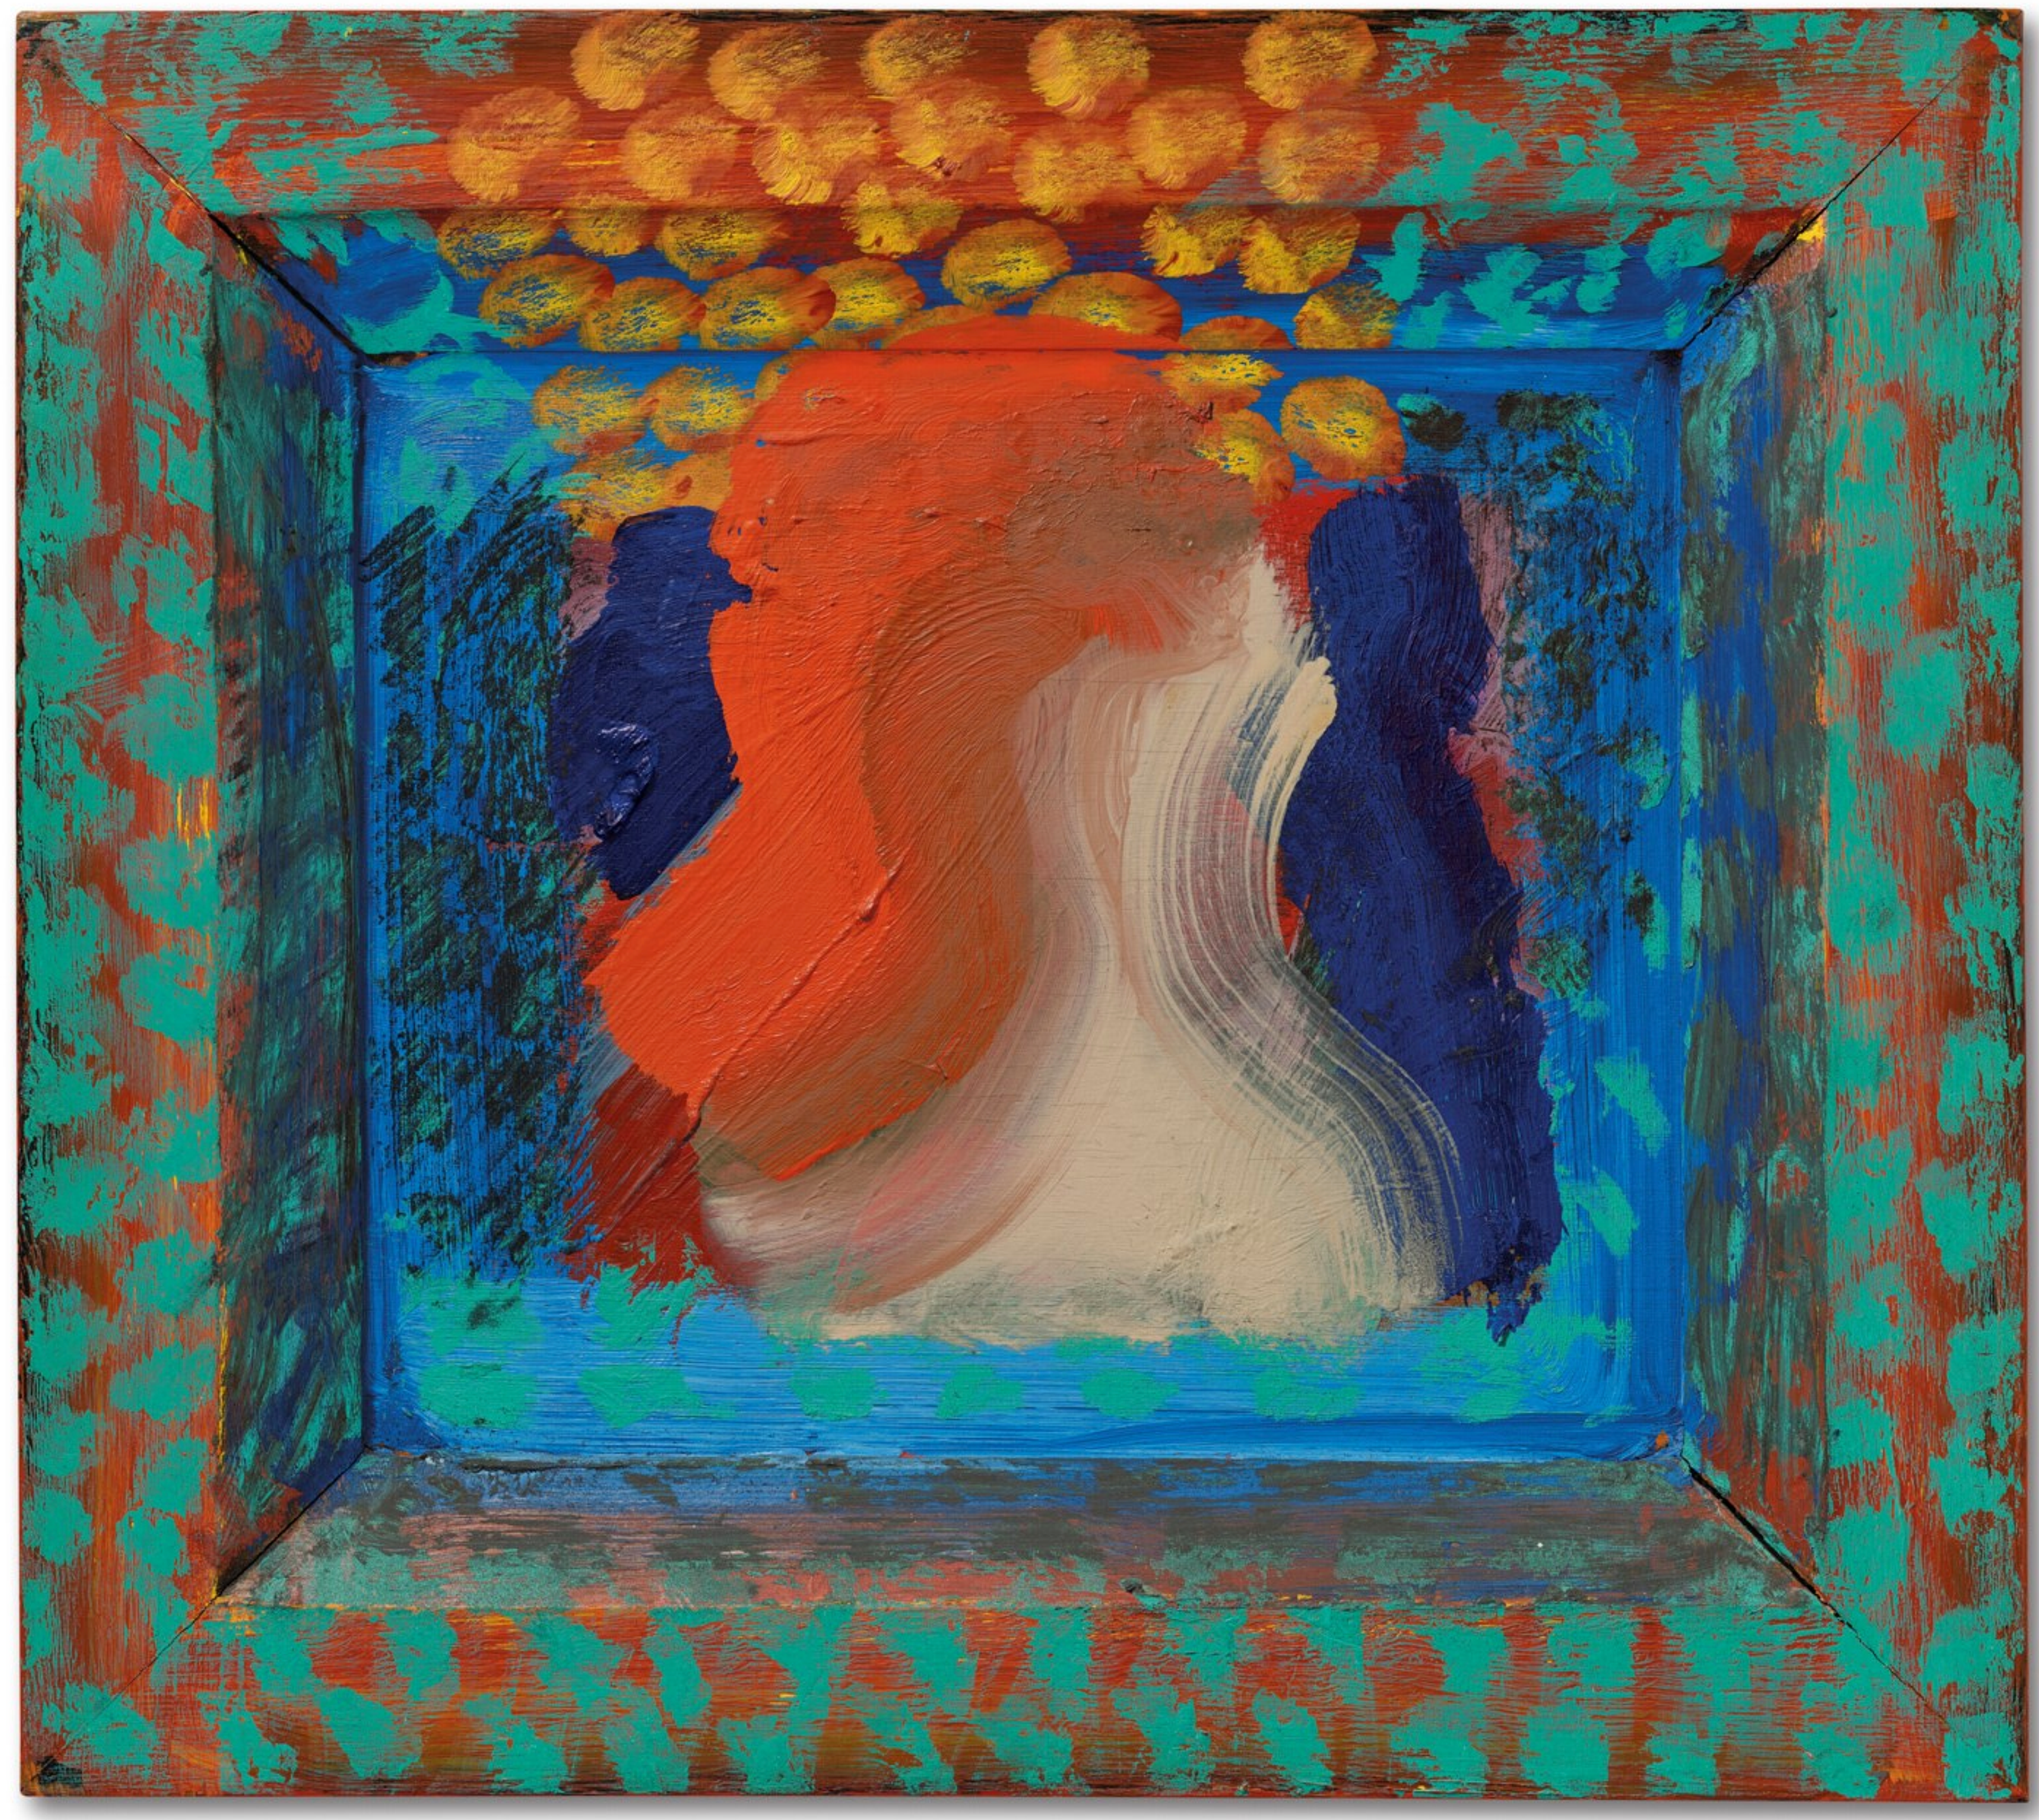 An oil on wood work by Howard Hodgkin depicting a myriad of blue, green, red, white, and yellow daubs and strokes of paint.